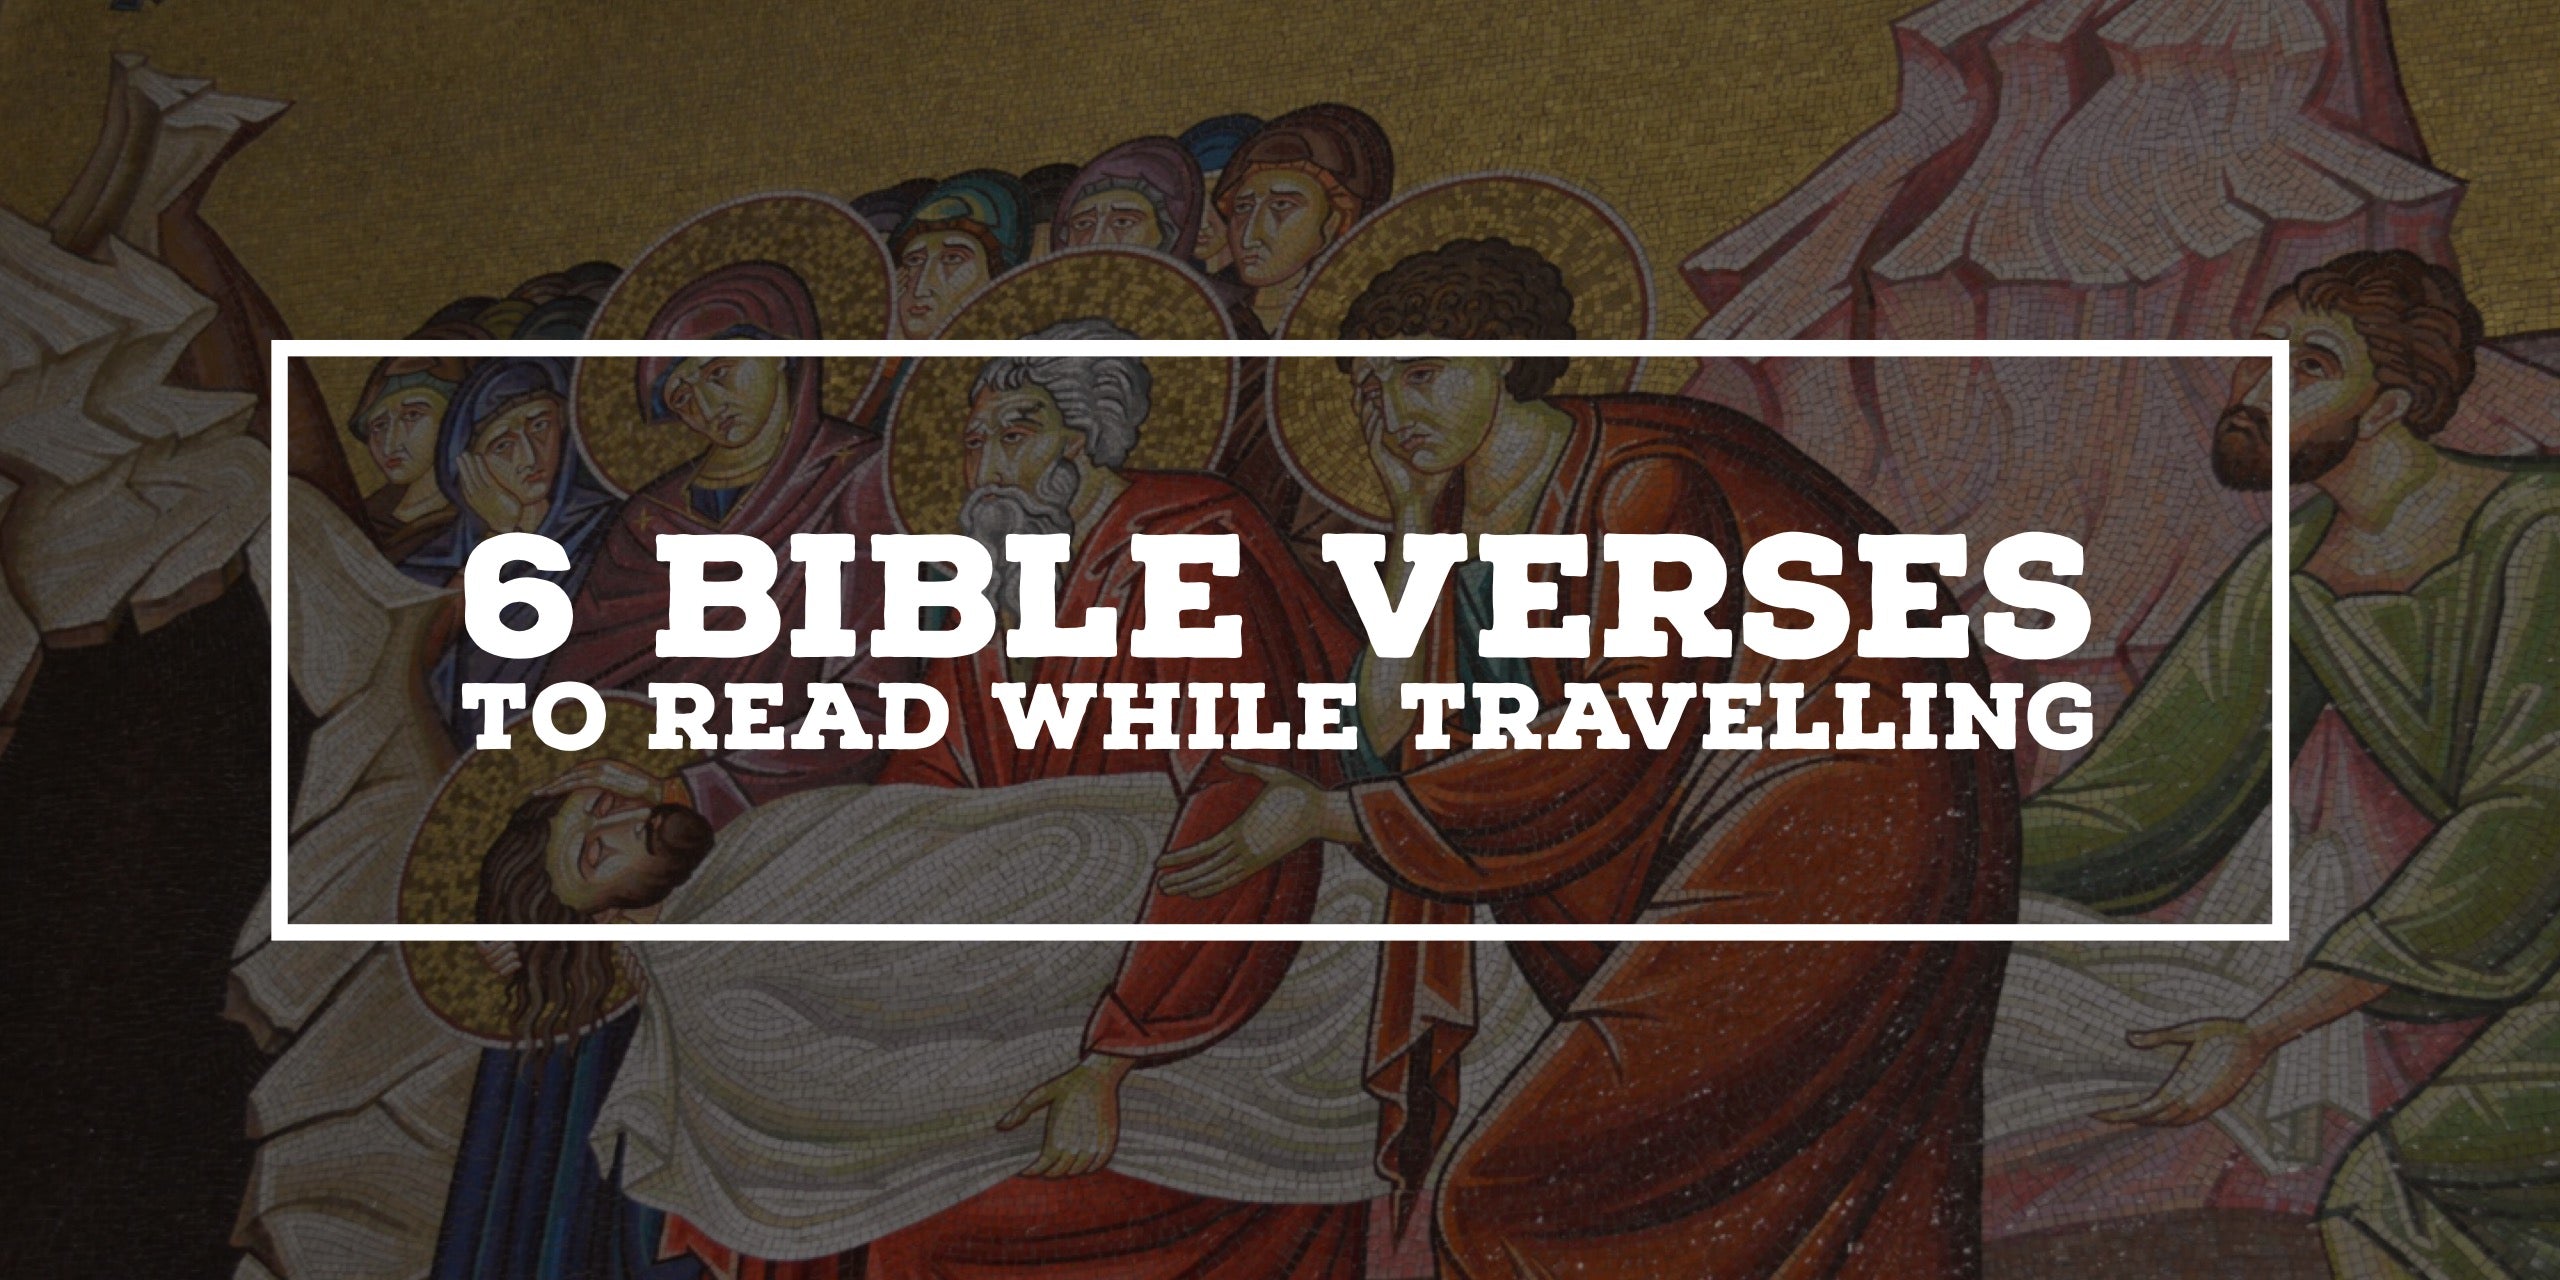 6 Bible Verses To Read While Travelling